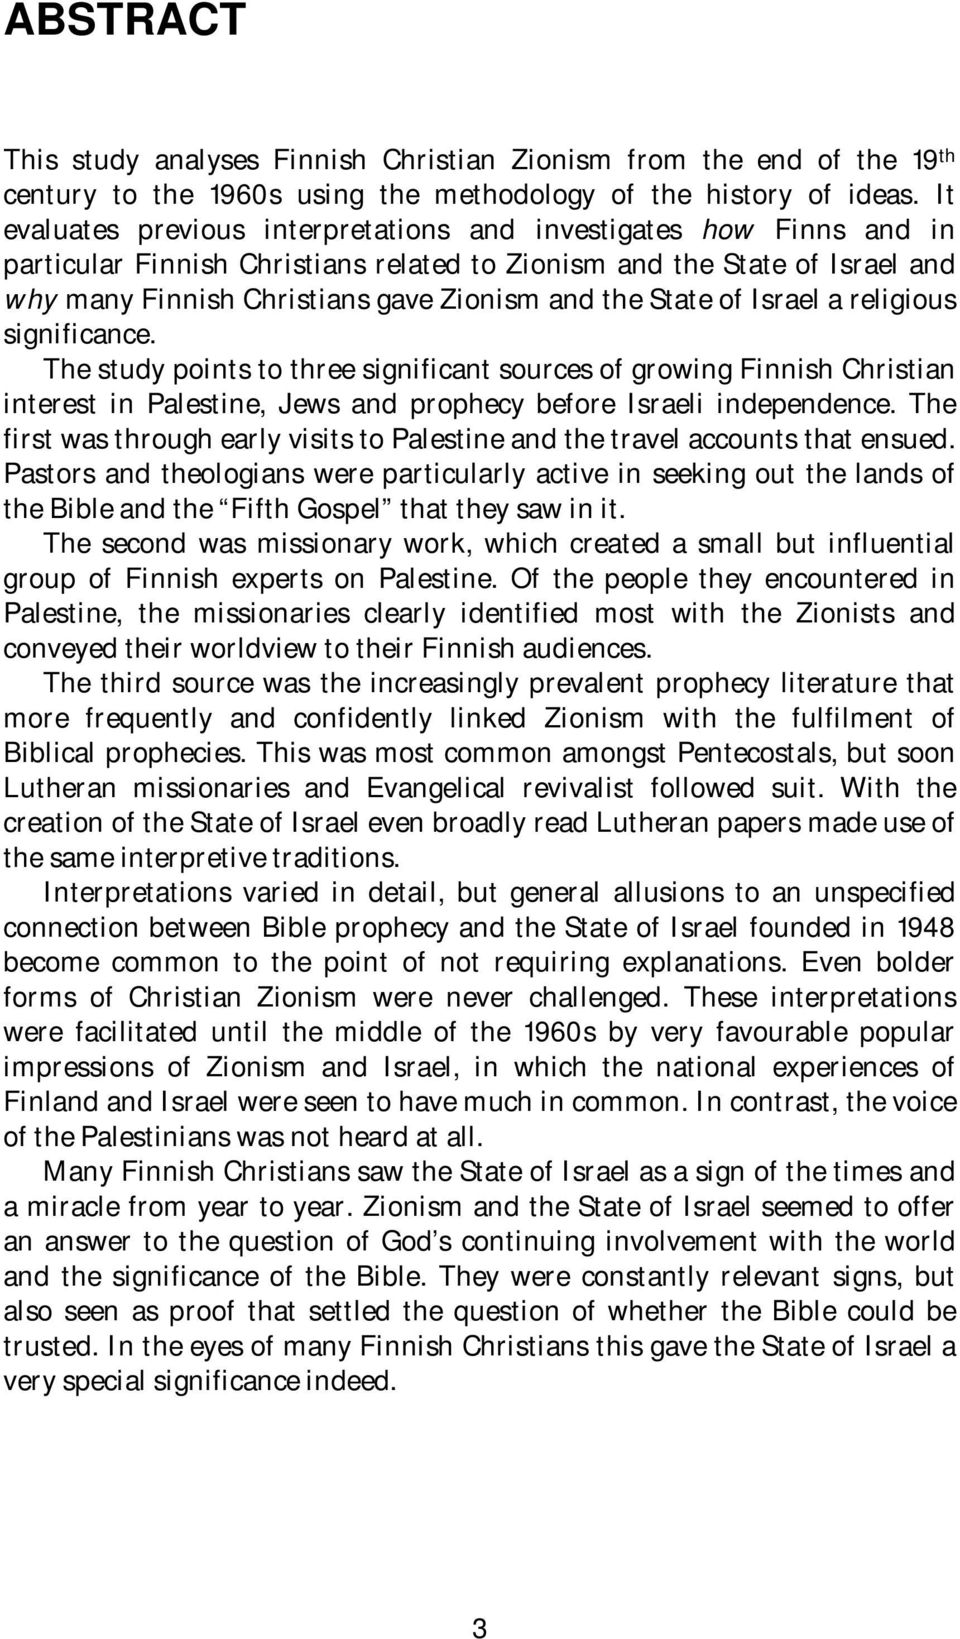 State of Israel a religious significance. The study points to three significant sources of growing Finnish Christian interest in Palestine, Jews and prophecy before Israeli independence.